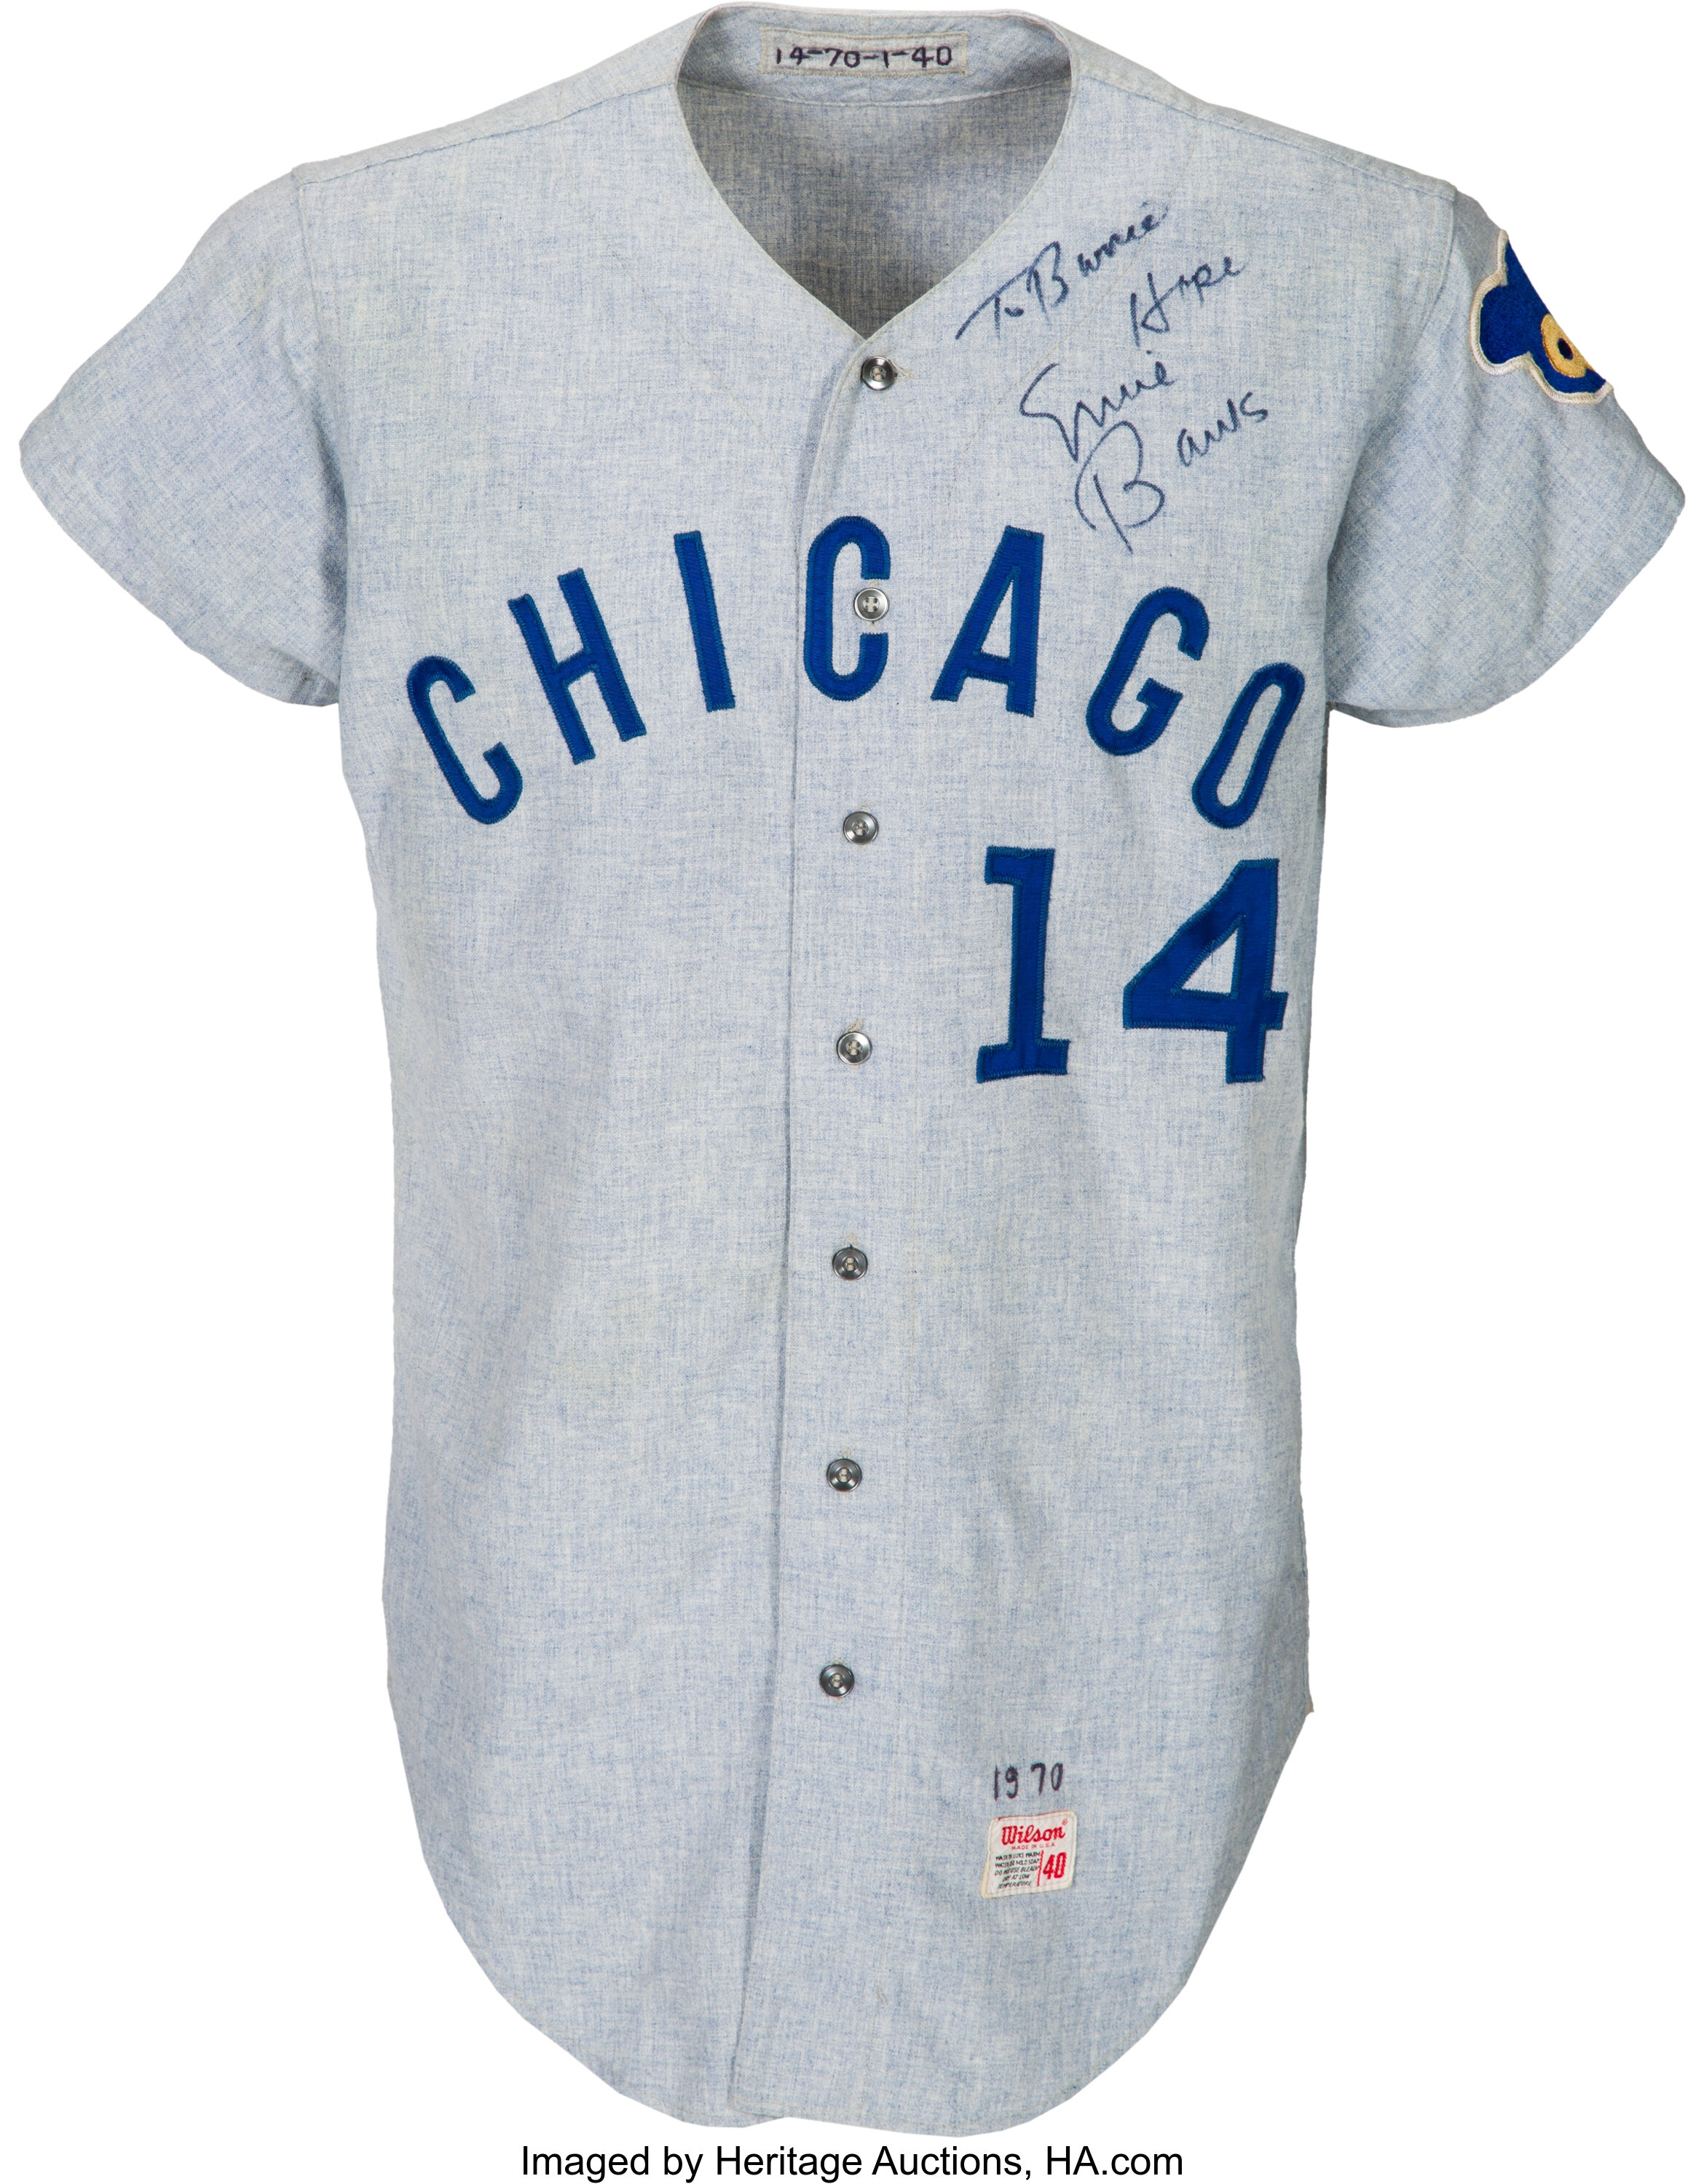 1970 Ernie Banks Chicago Cubs autographed game worn jersey. $100,000.